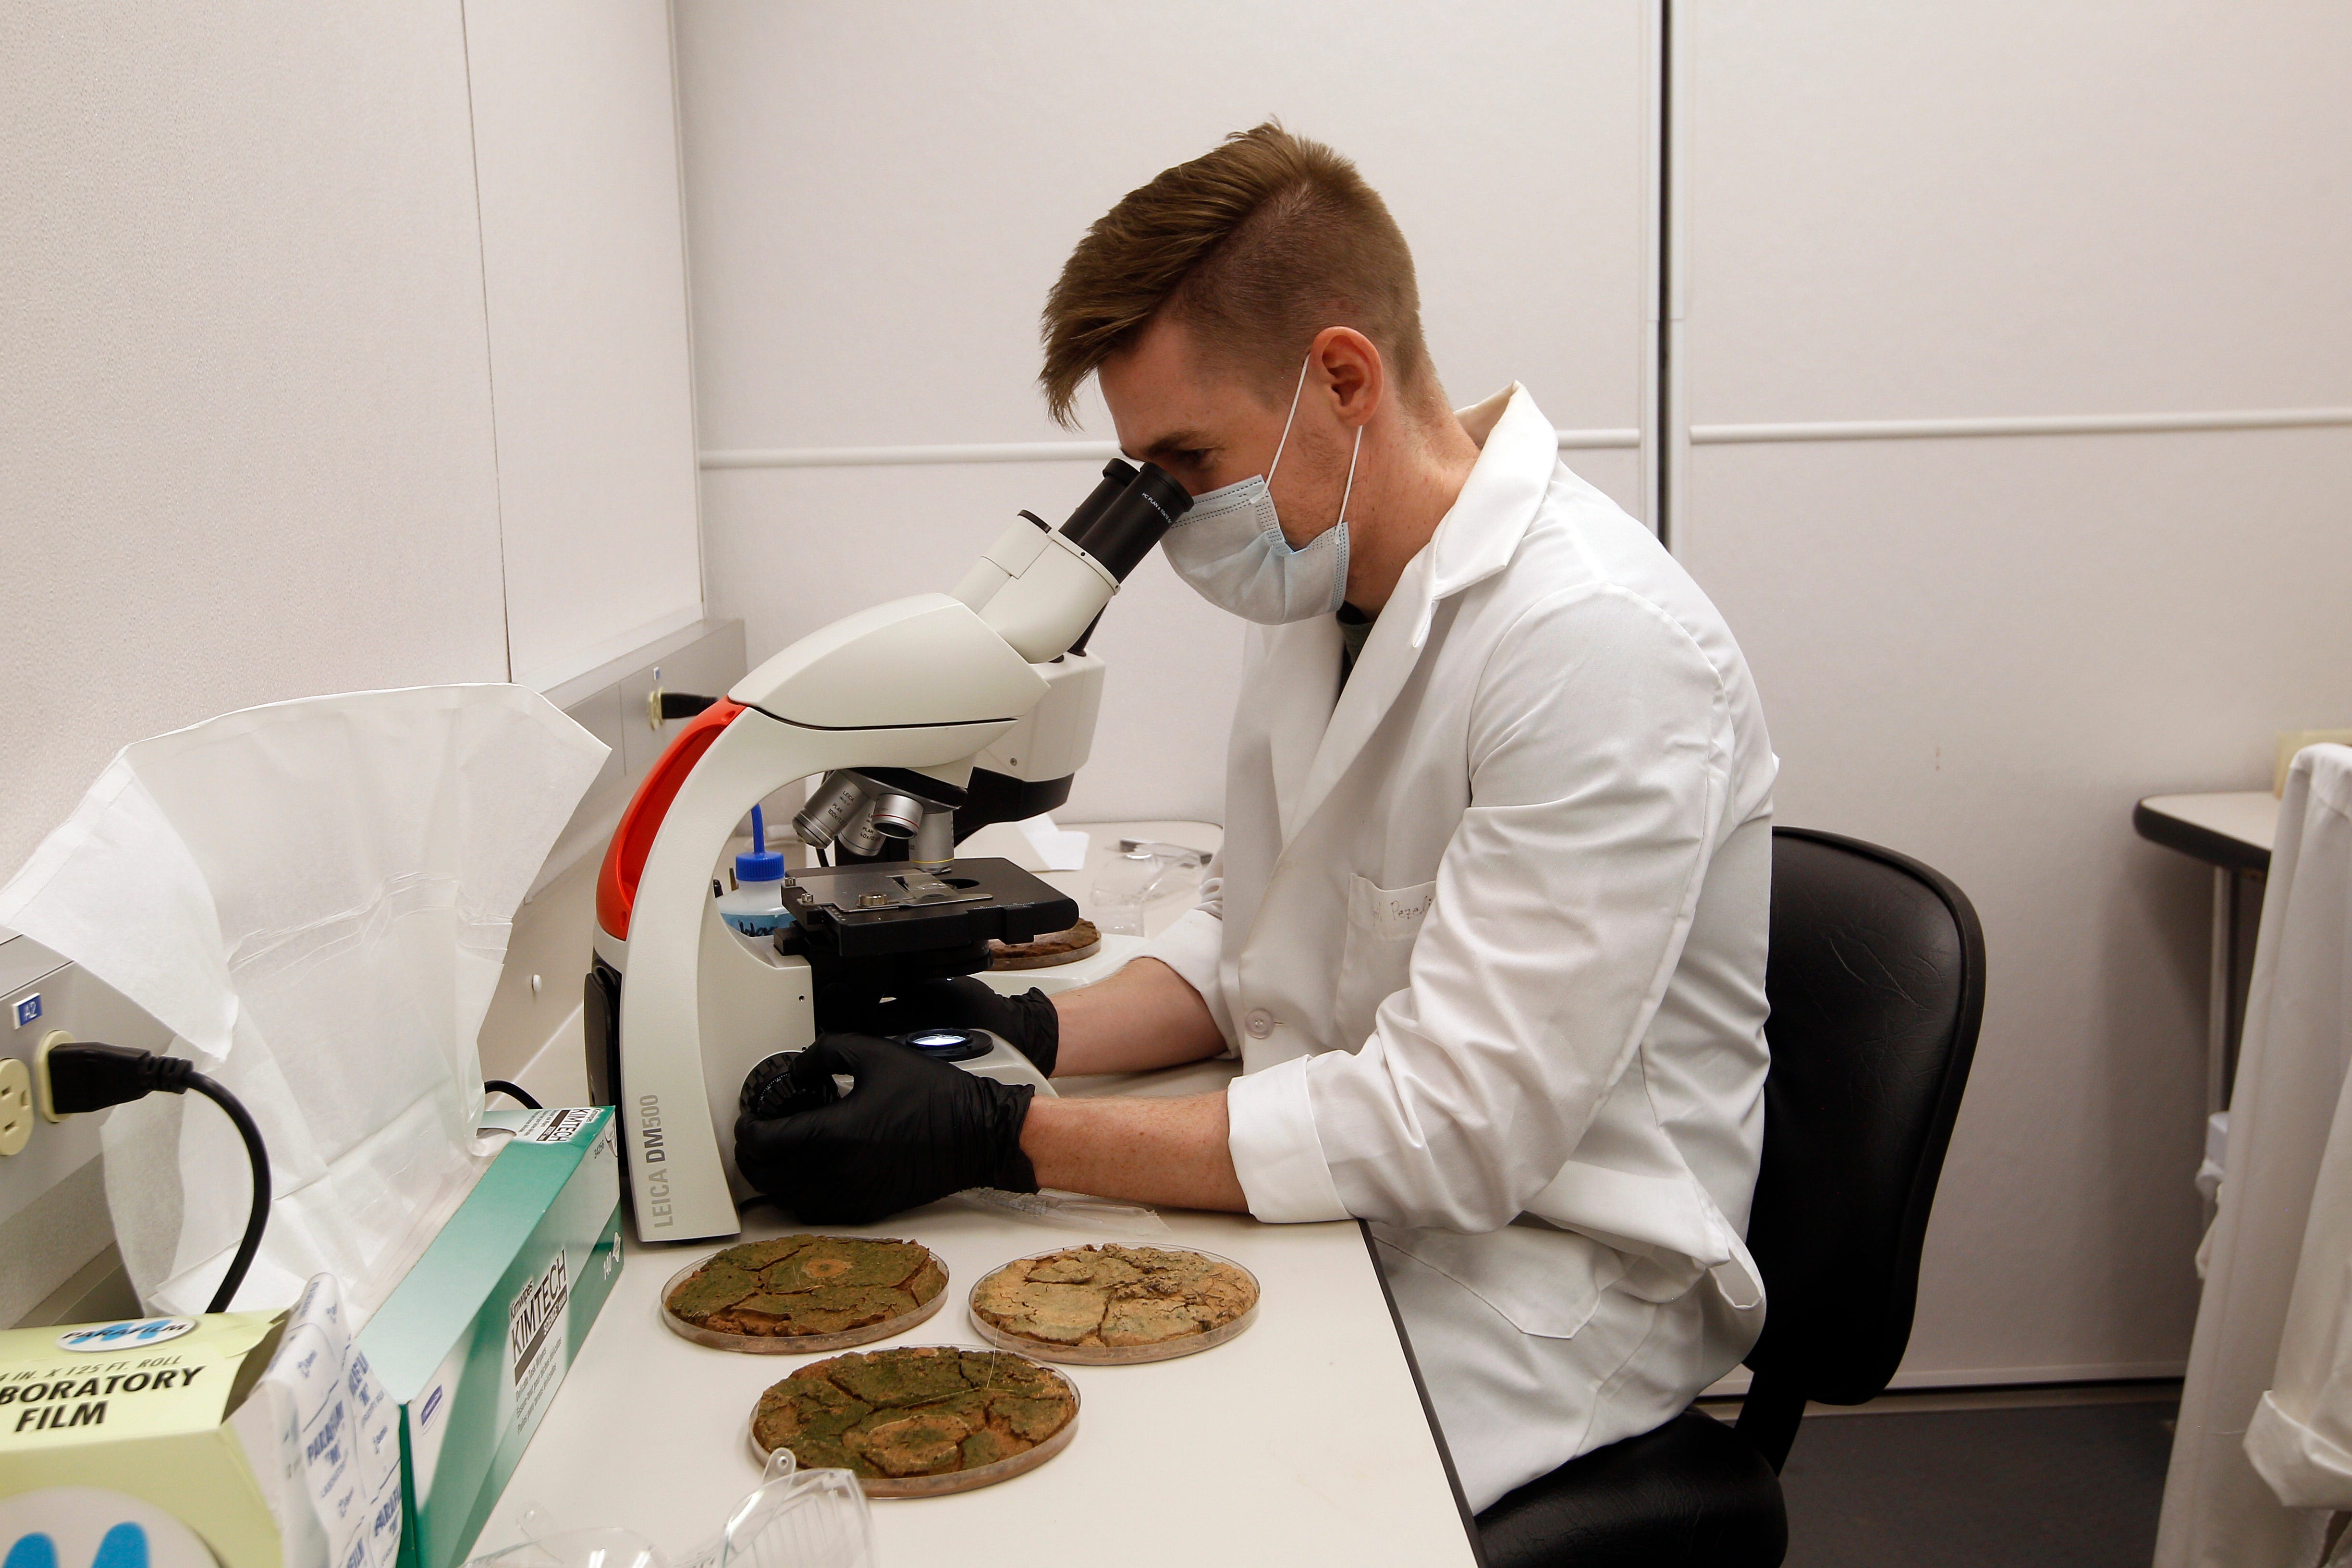 ASU research assistant Corey Nelson inspects samples of biocrust under a microscope.